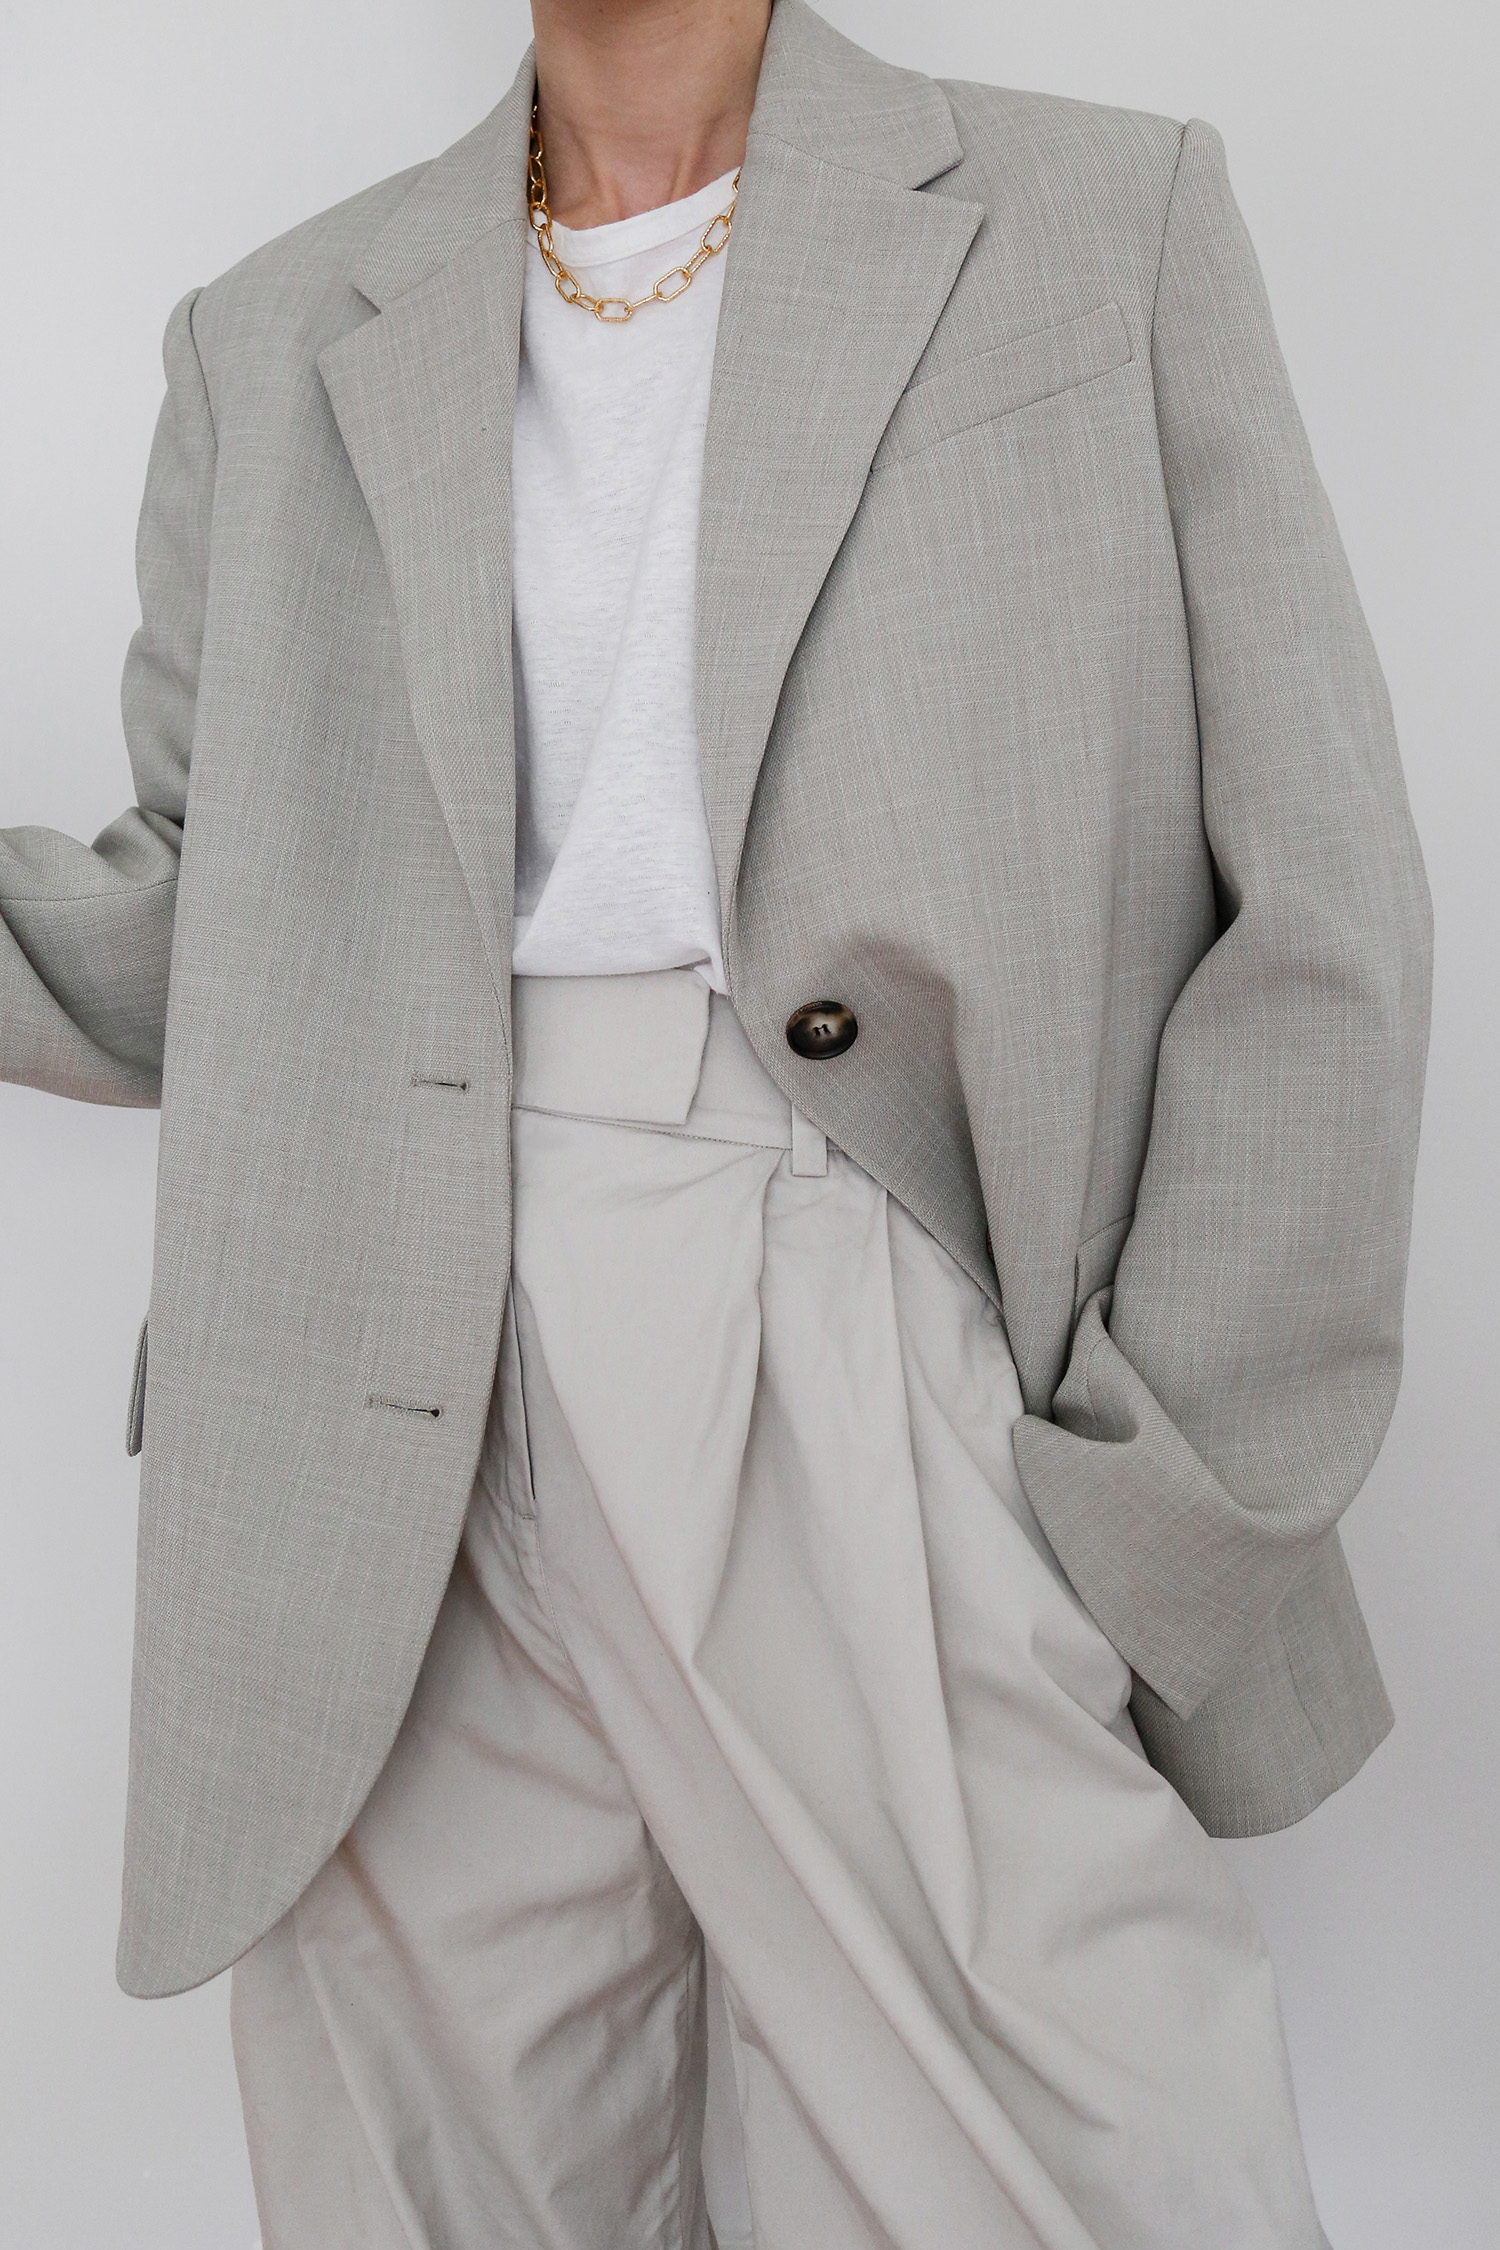 Camilla and Marc morella blazer with COS trousers